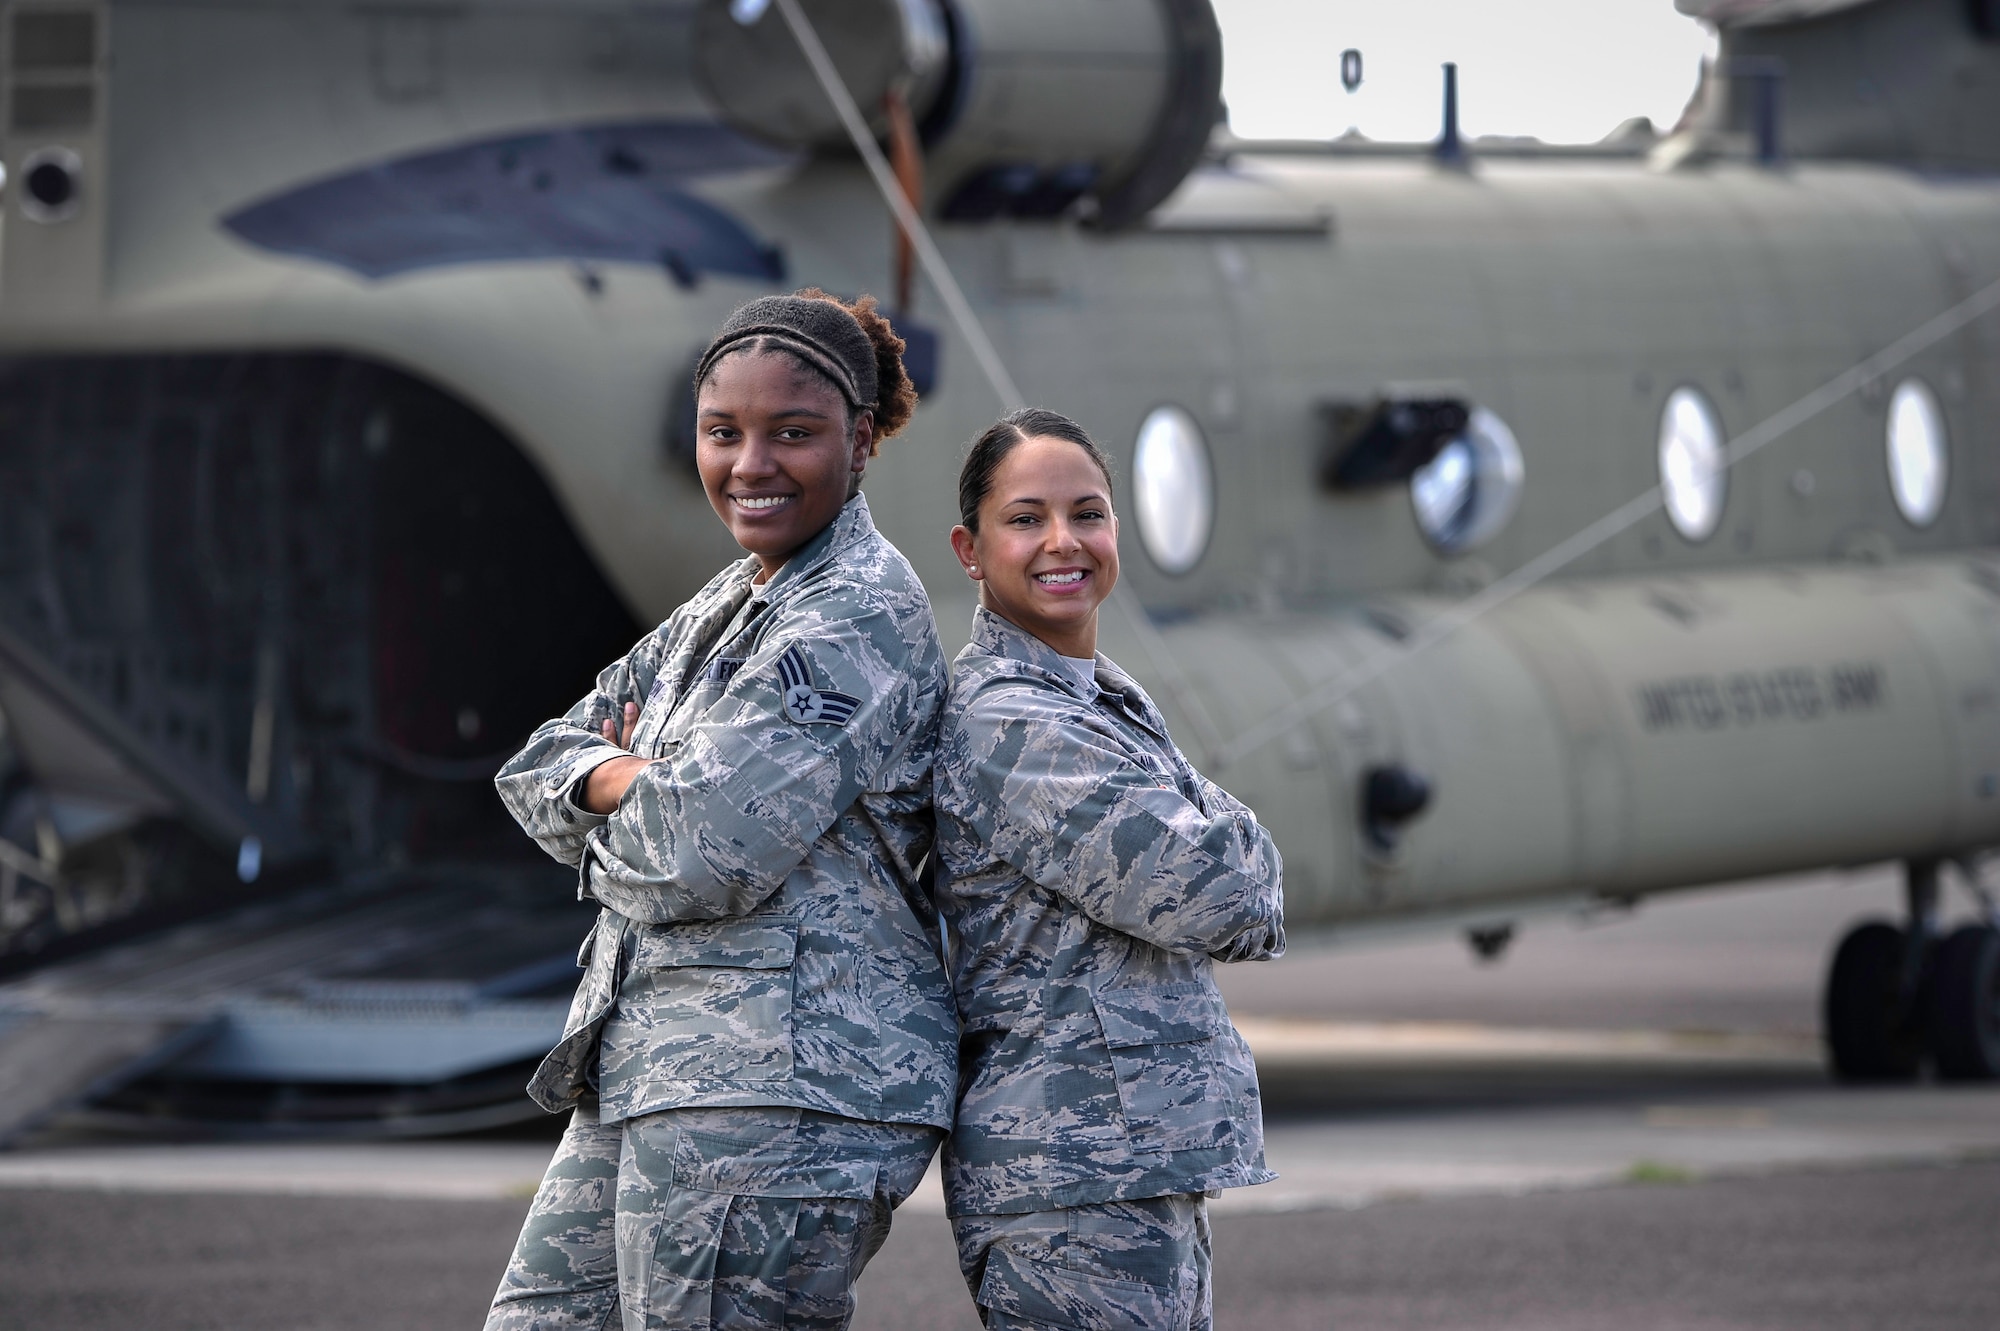 U.S. Air Force Capt. Amber El-Amin, Joint Task Force-Bravo Operations Medical Planner, and Senior Airman Synethia Robinson, JTF-Bravo medical operations noncommissioned-officer-in-charge, pose behind a 1st Battalion, 228th Aviation Regiment CH-47 Chinook helicopter July 25, 2016 at Soto Cano Air Base, Honduras. The aircraft is being loaded in preparation for a Medical Readiness Exercise mission in the Colón department of Honduras. The duo spends approximately 180-200 hours over 12 weeks preparing for each MEDRETE - events that have been the backbone of JTF-Bravo’s humanitarian mission in Central America for the past 23 years and have touched the lives of hundreds of thousands of people, built partner nation capacity and fostered goodwill towards the U.S. in the region. (U.S. Air Force photo by Staff Sgt. Siuta B. Ika)